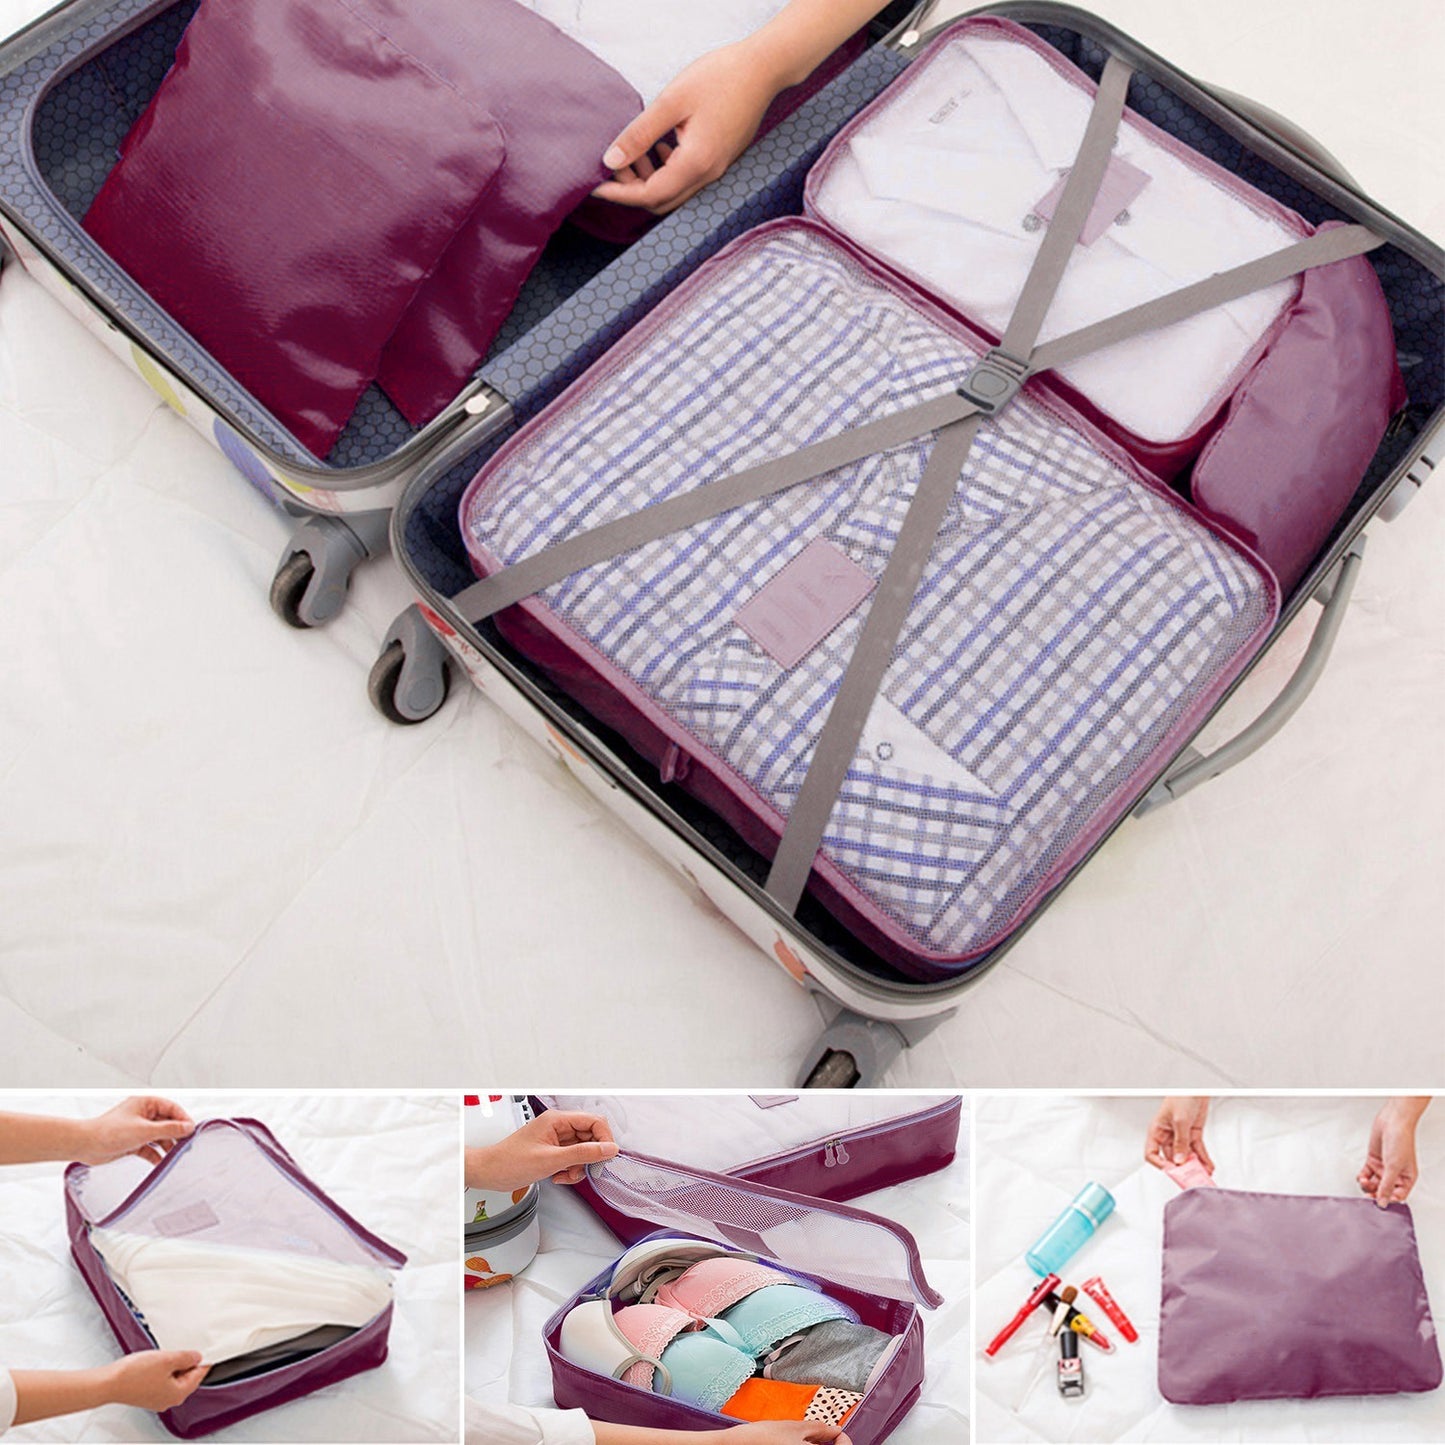 9Pcs Clothes Storage Bags Water-Resistant Travel Luggage Organizer Clothing Packing Cubes